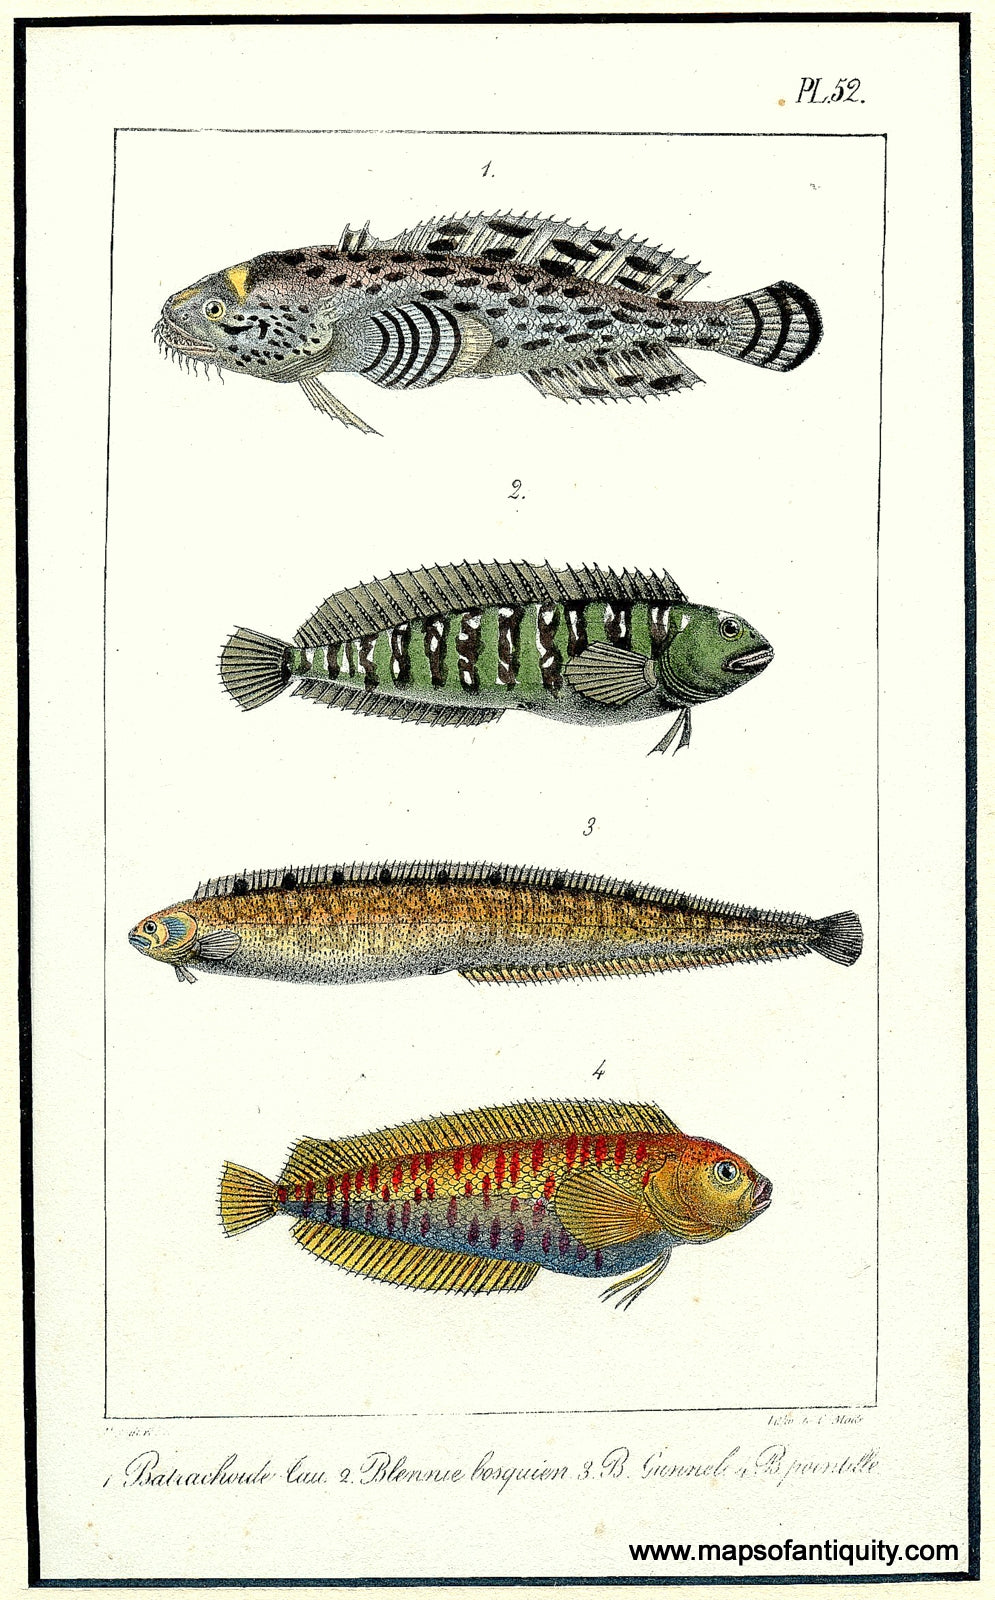 Hand-Colored-Antique-Illustration-Blennie-bosquien-etc.-Plate-52****-Natural-History-Fish-1837-Turpin-Maps-Of-Antiquity